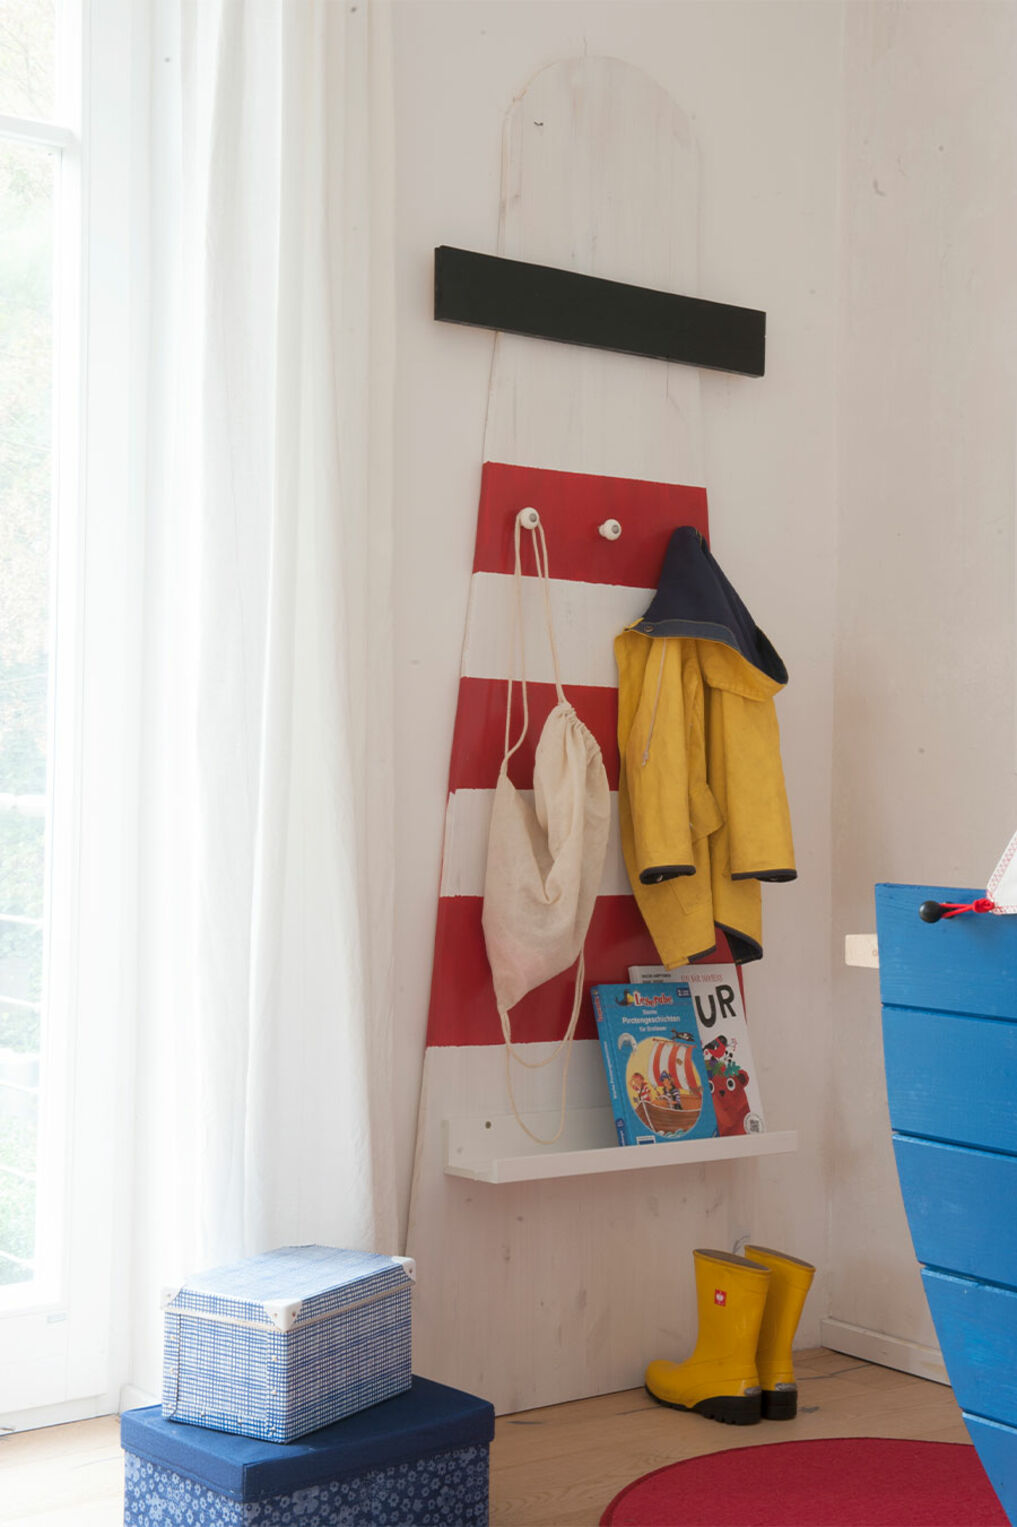 Osmo Dekorwachs loft bed and lighthouse shelf fit into maritime children’s bedroom